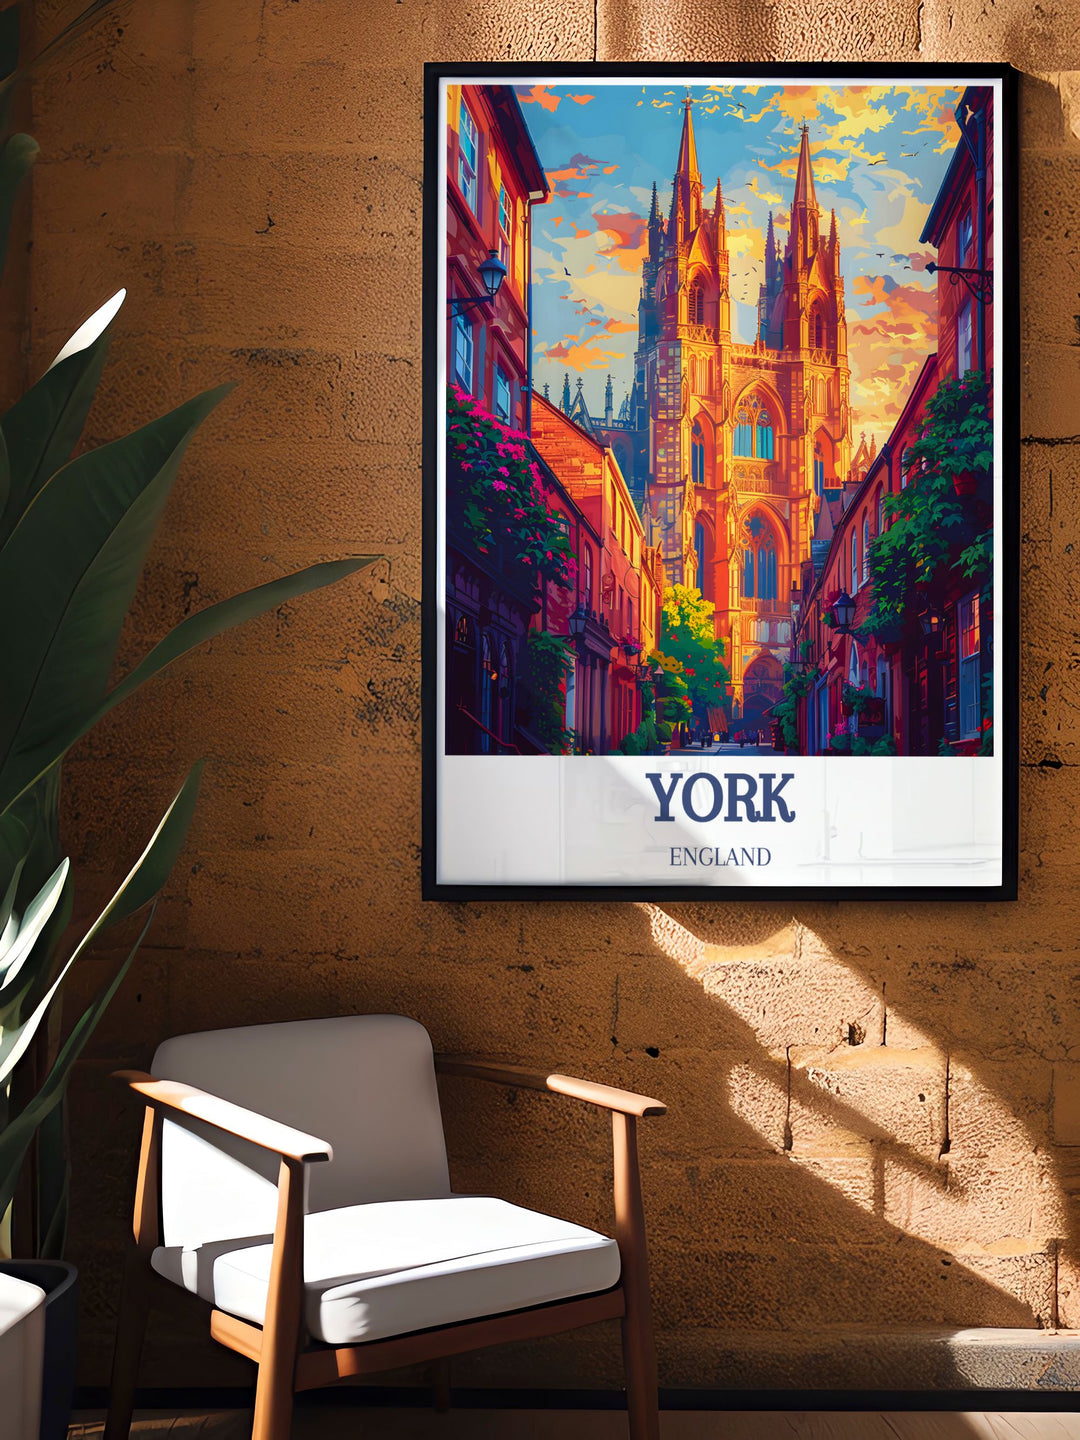 Yorkshire Wolds Art illustrating the scenic beauty and cultural heritage of North Yorkshire. Complements any decor with the historic charm of ENGLAND, York Minster.